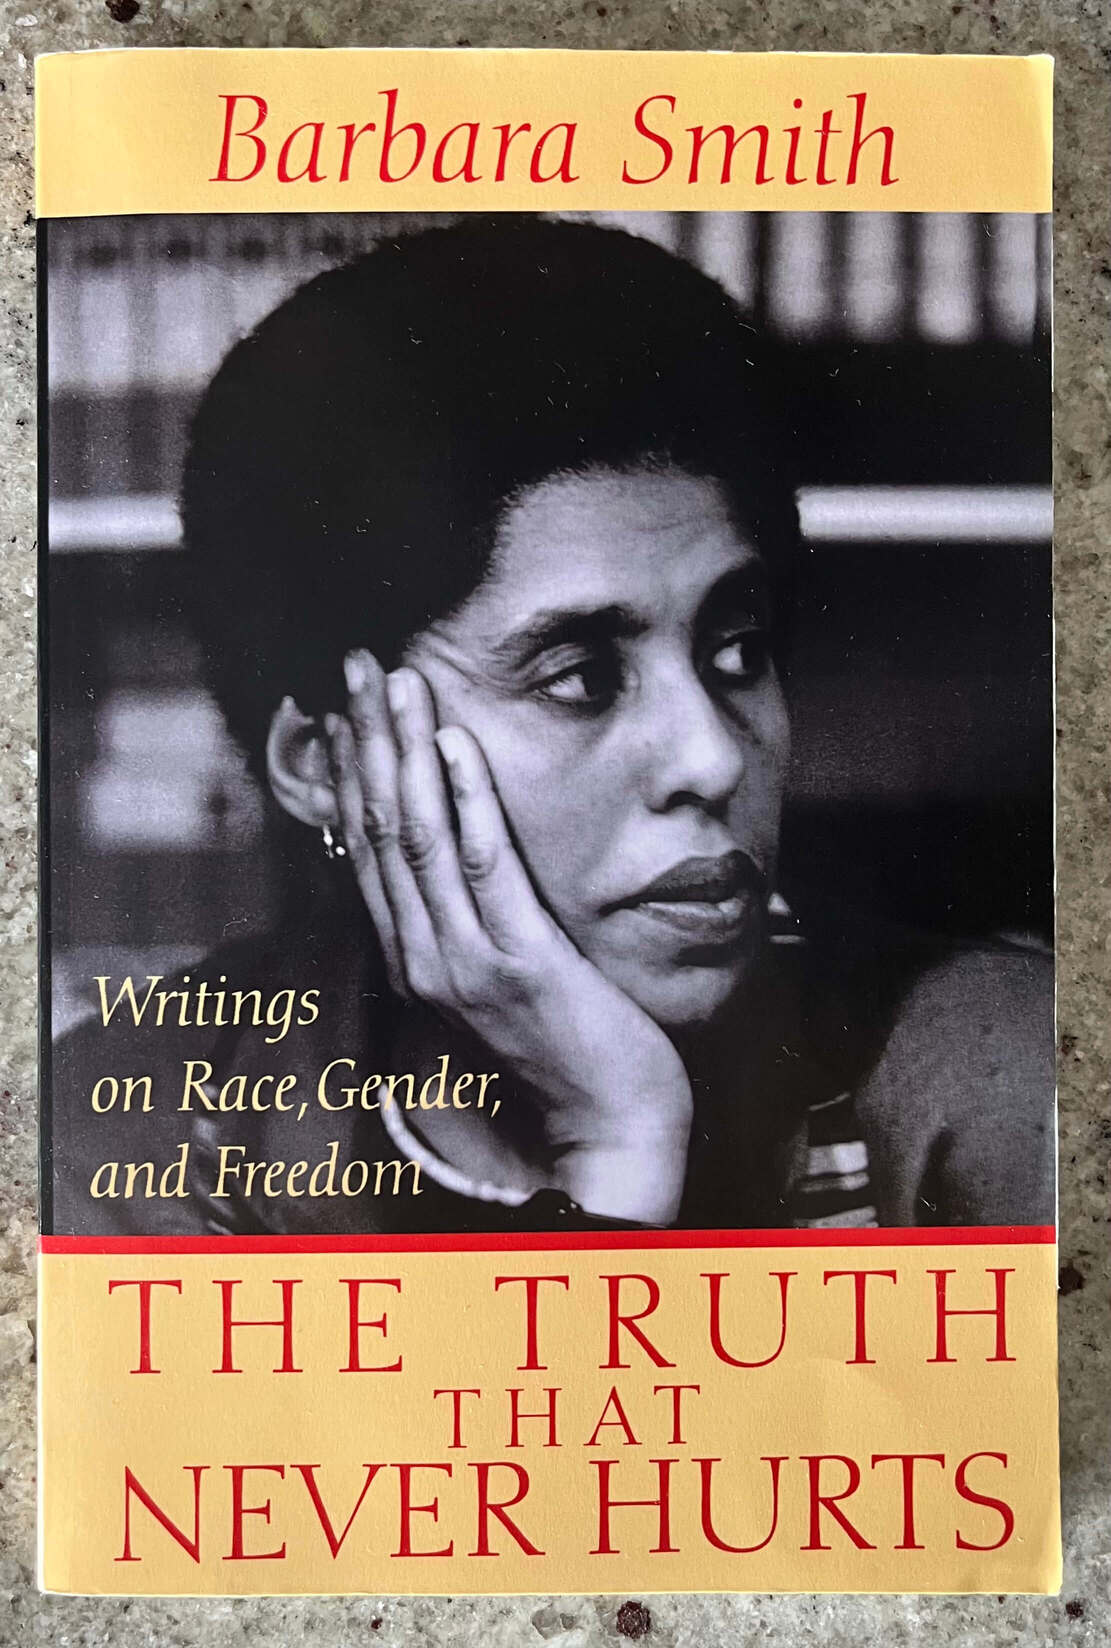 “The Truth That Never Hurts: Writings on Race, Gender, and Freedom” by Barbara Smith.